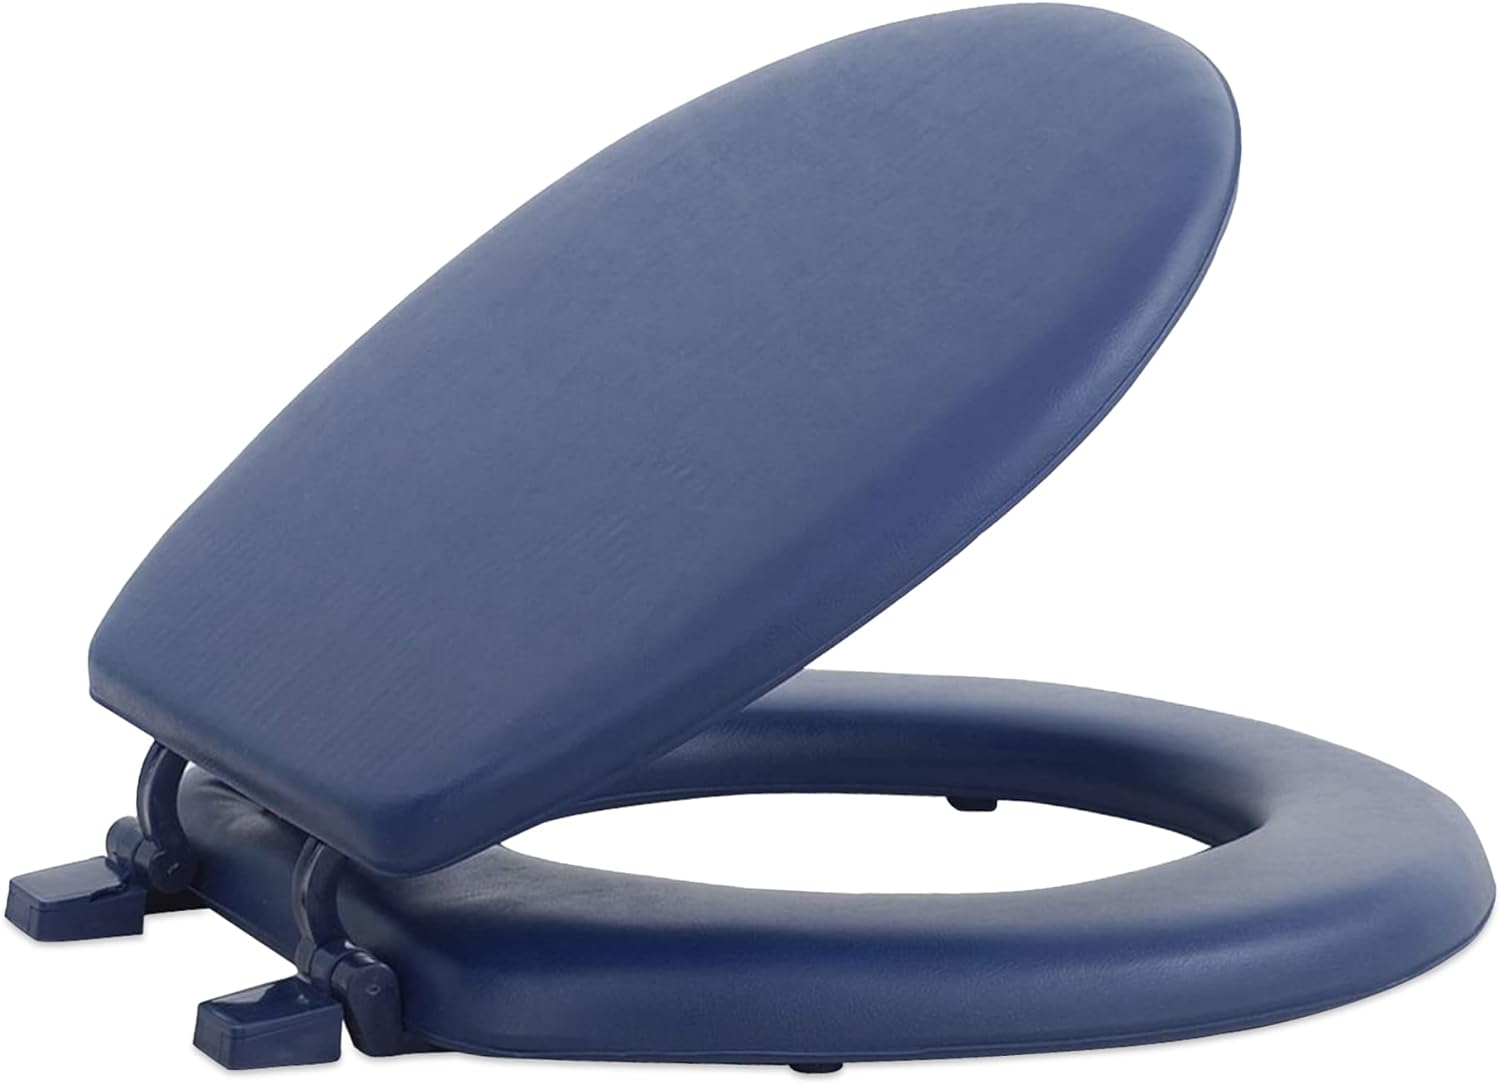 Achim Imports (Home Improvemen Soft Standard Vinyl Toilet Seat, Navy - 17 Inch Soft Vinyl Cover with Comfort Foam Cushioning - Fits All Standard Size Fixtures